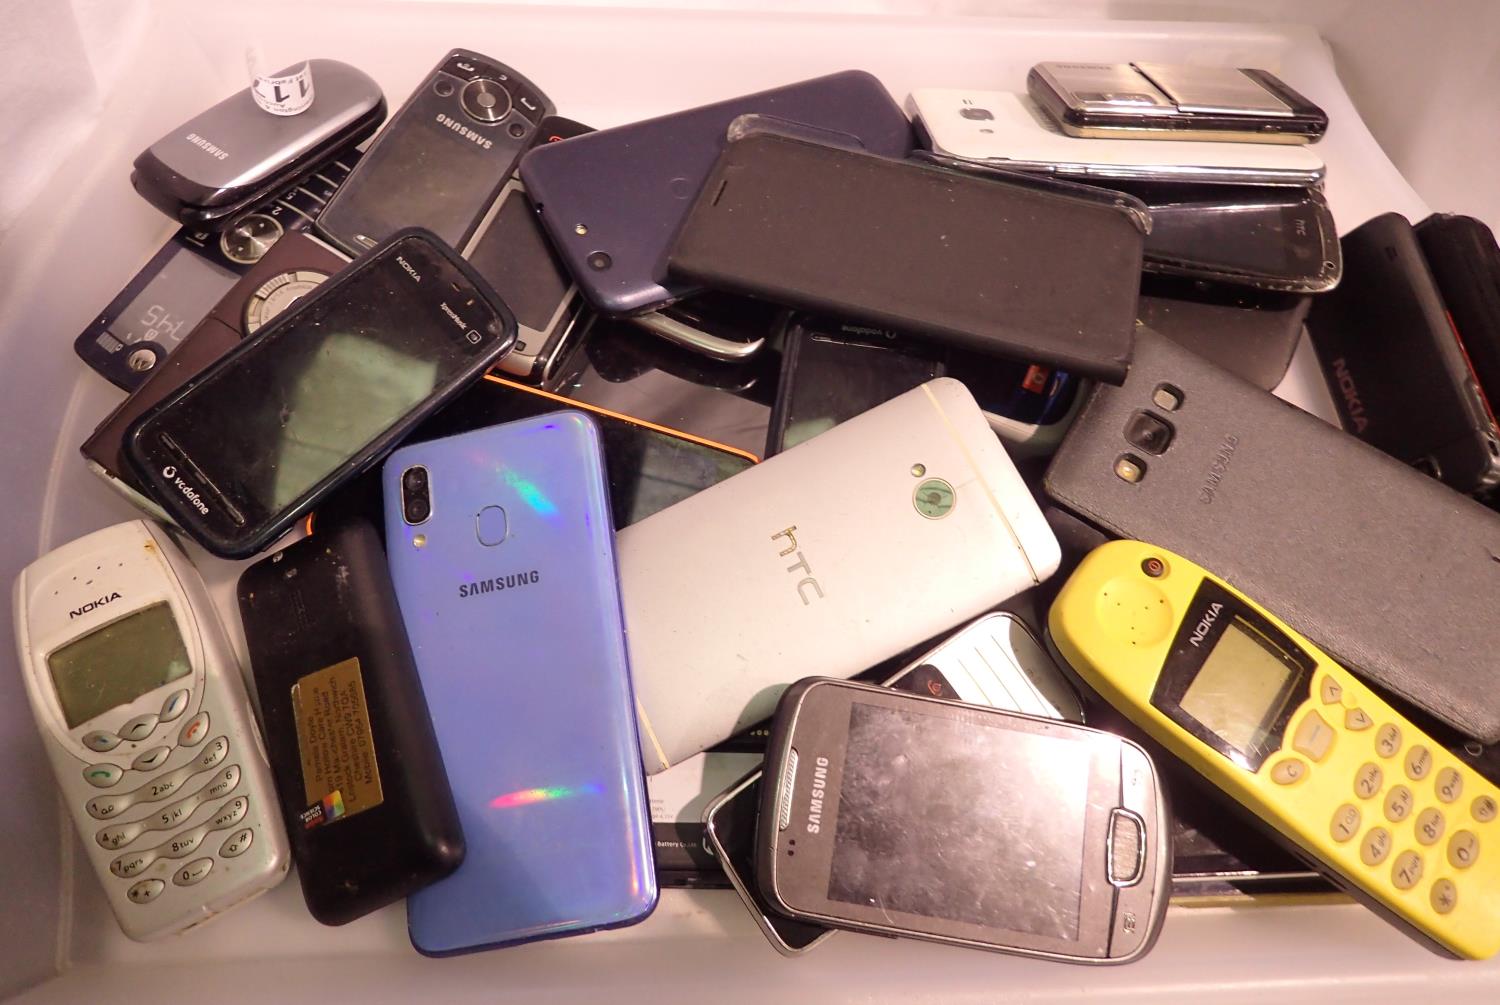 Tray of mixed mobile phones including Samsung and HTC. P&P Group 2 (£18+VAT for the first lot and £